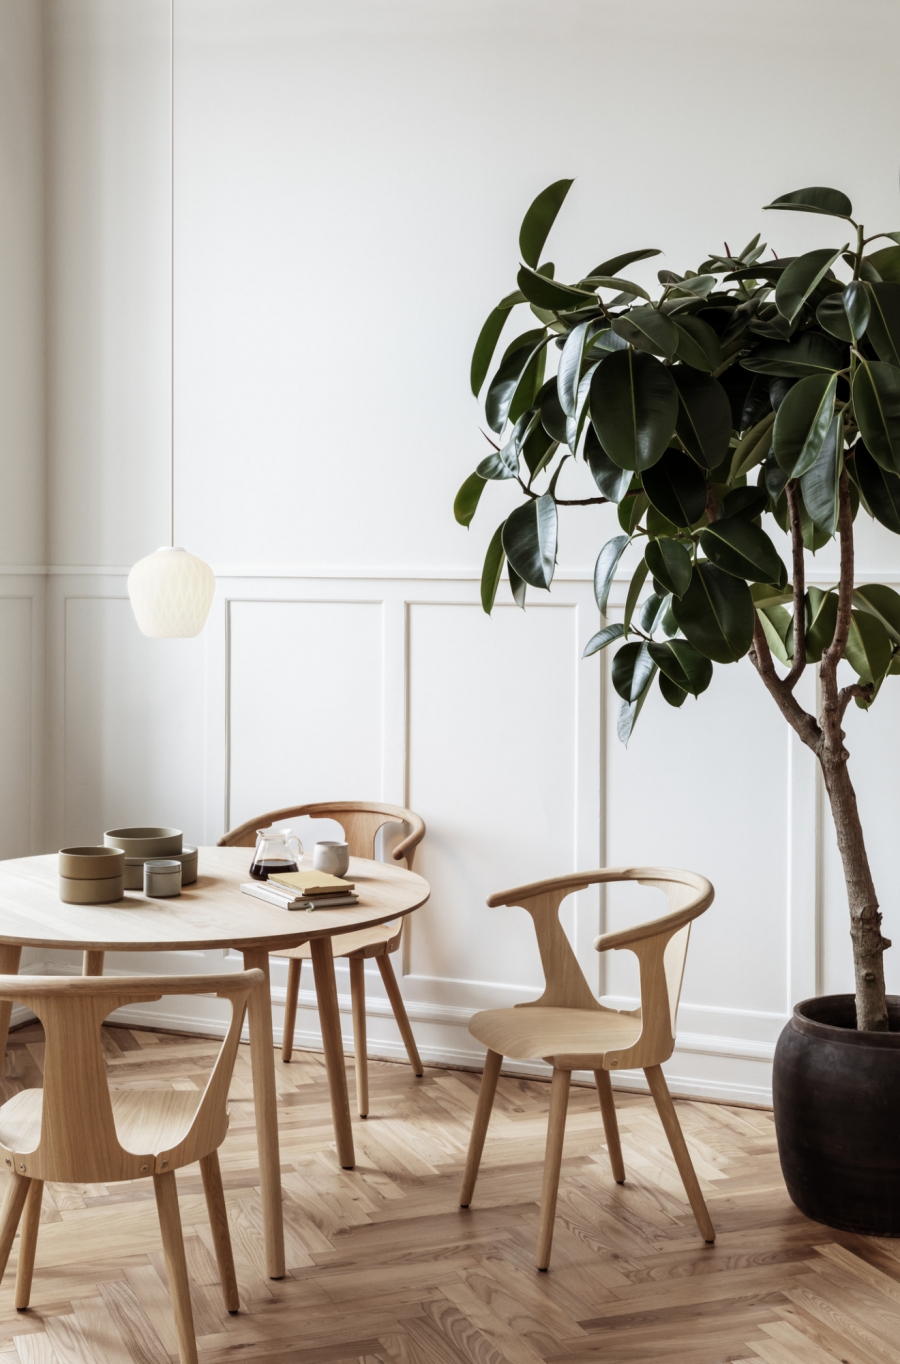 In Between Chair SK1 designed by Sami Kallio for &Tradition, &Tradition SK1 dining chair, SK1 In Between chair 